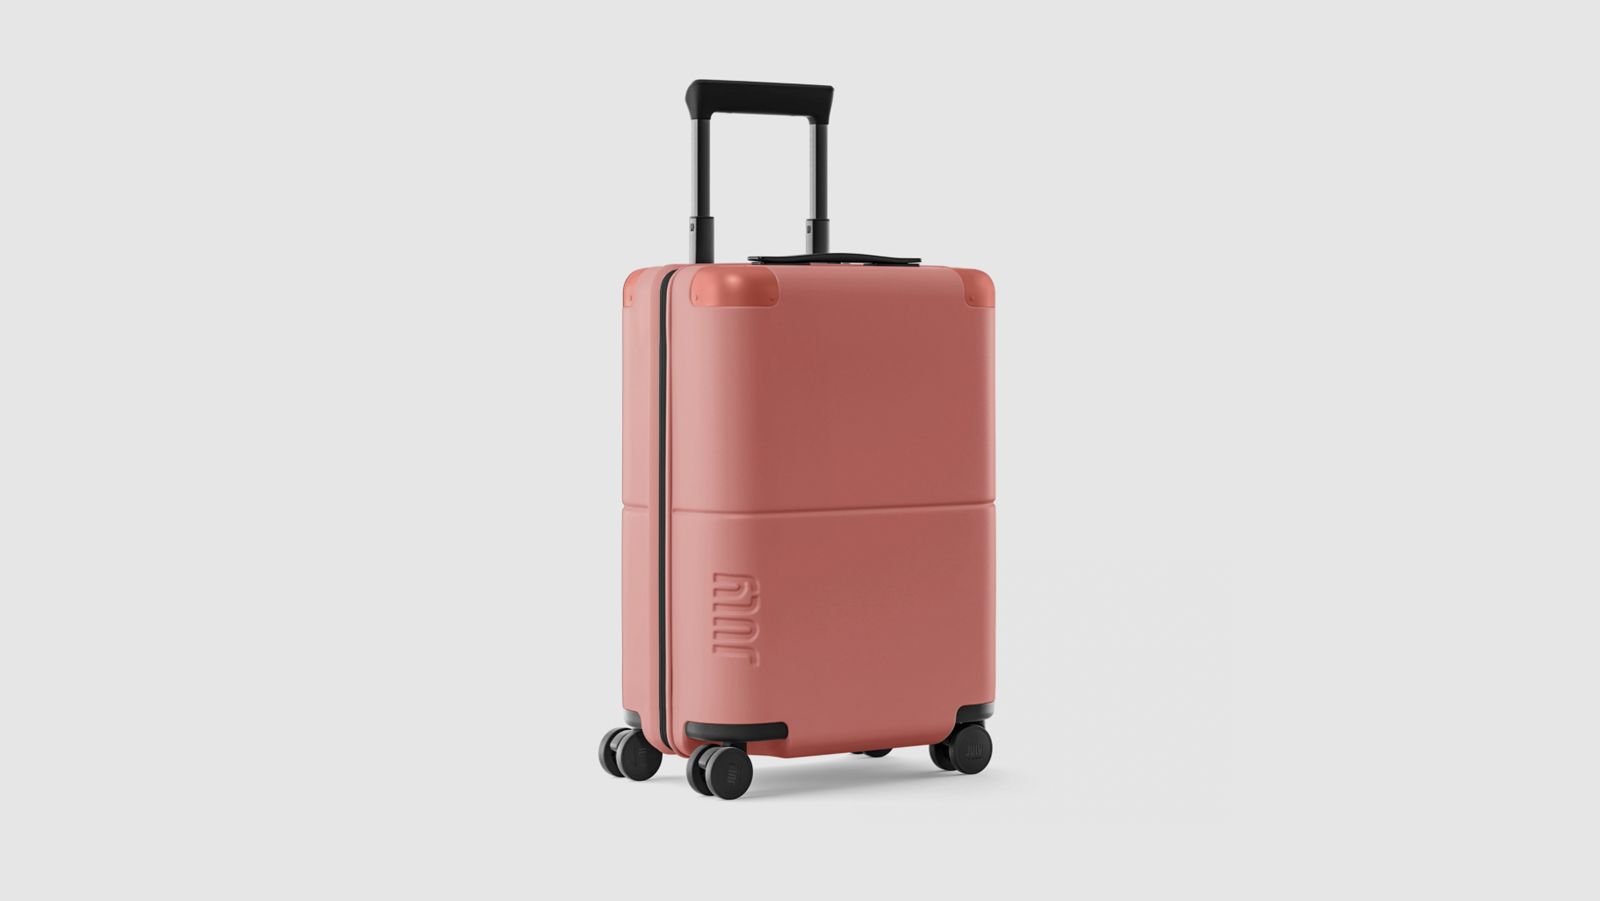 July luggage review: Personalizable, lightweight carry-ons | CNN Underscored